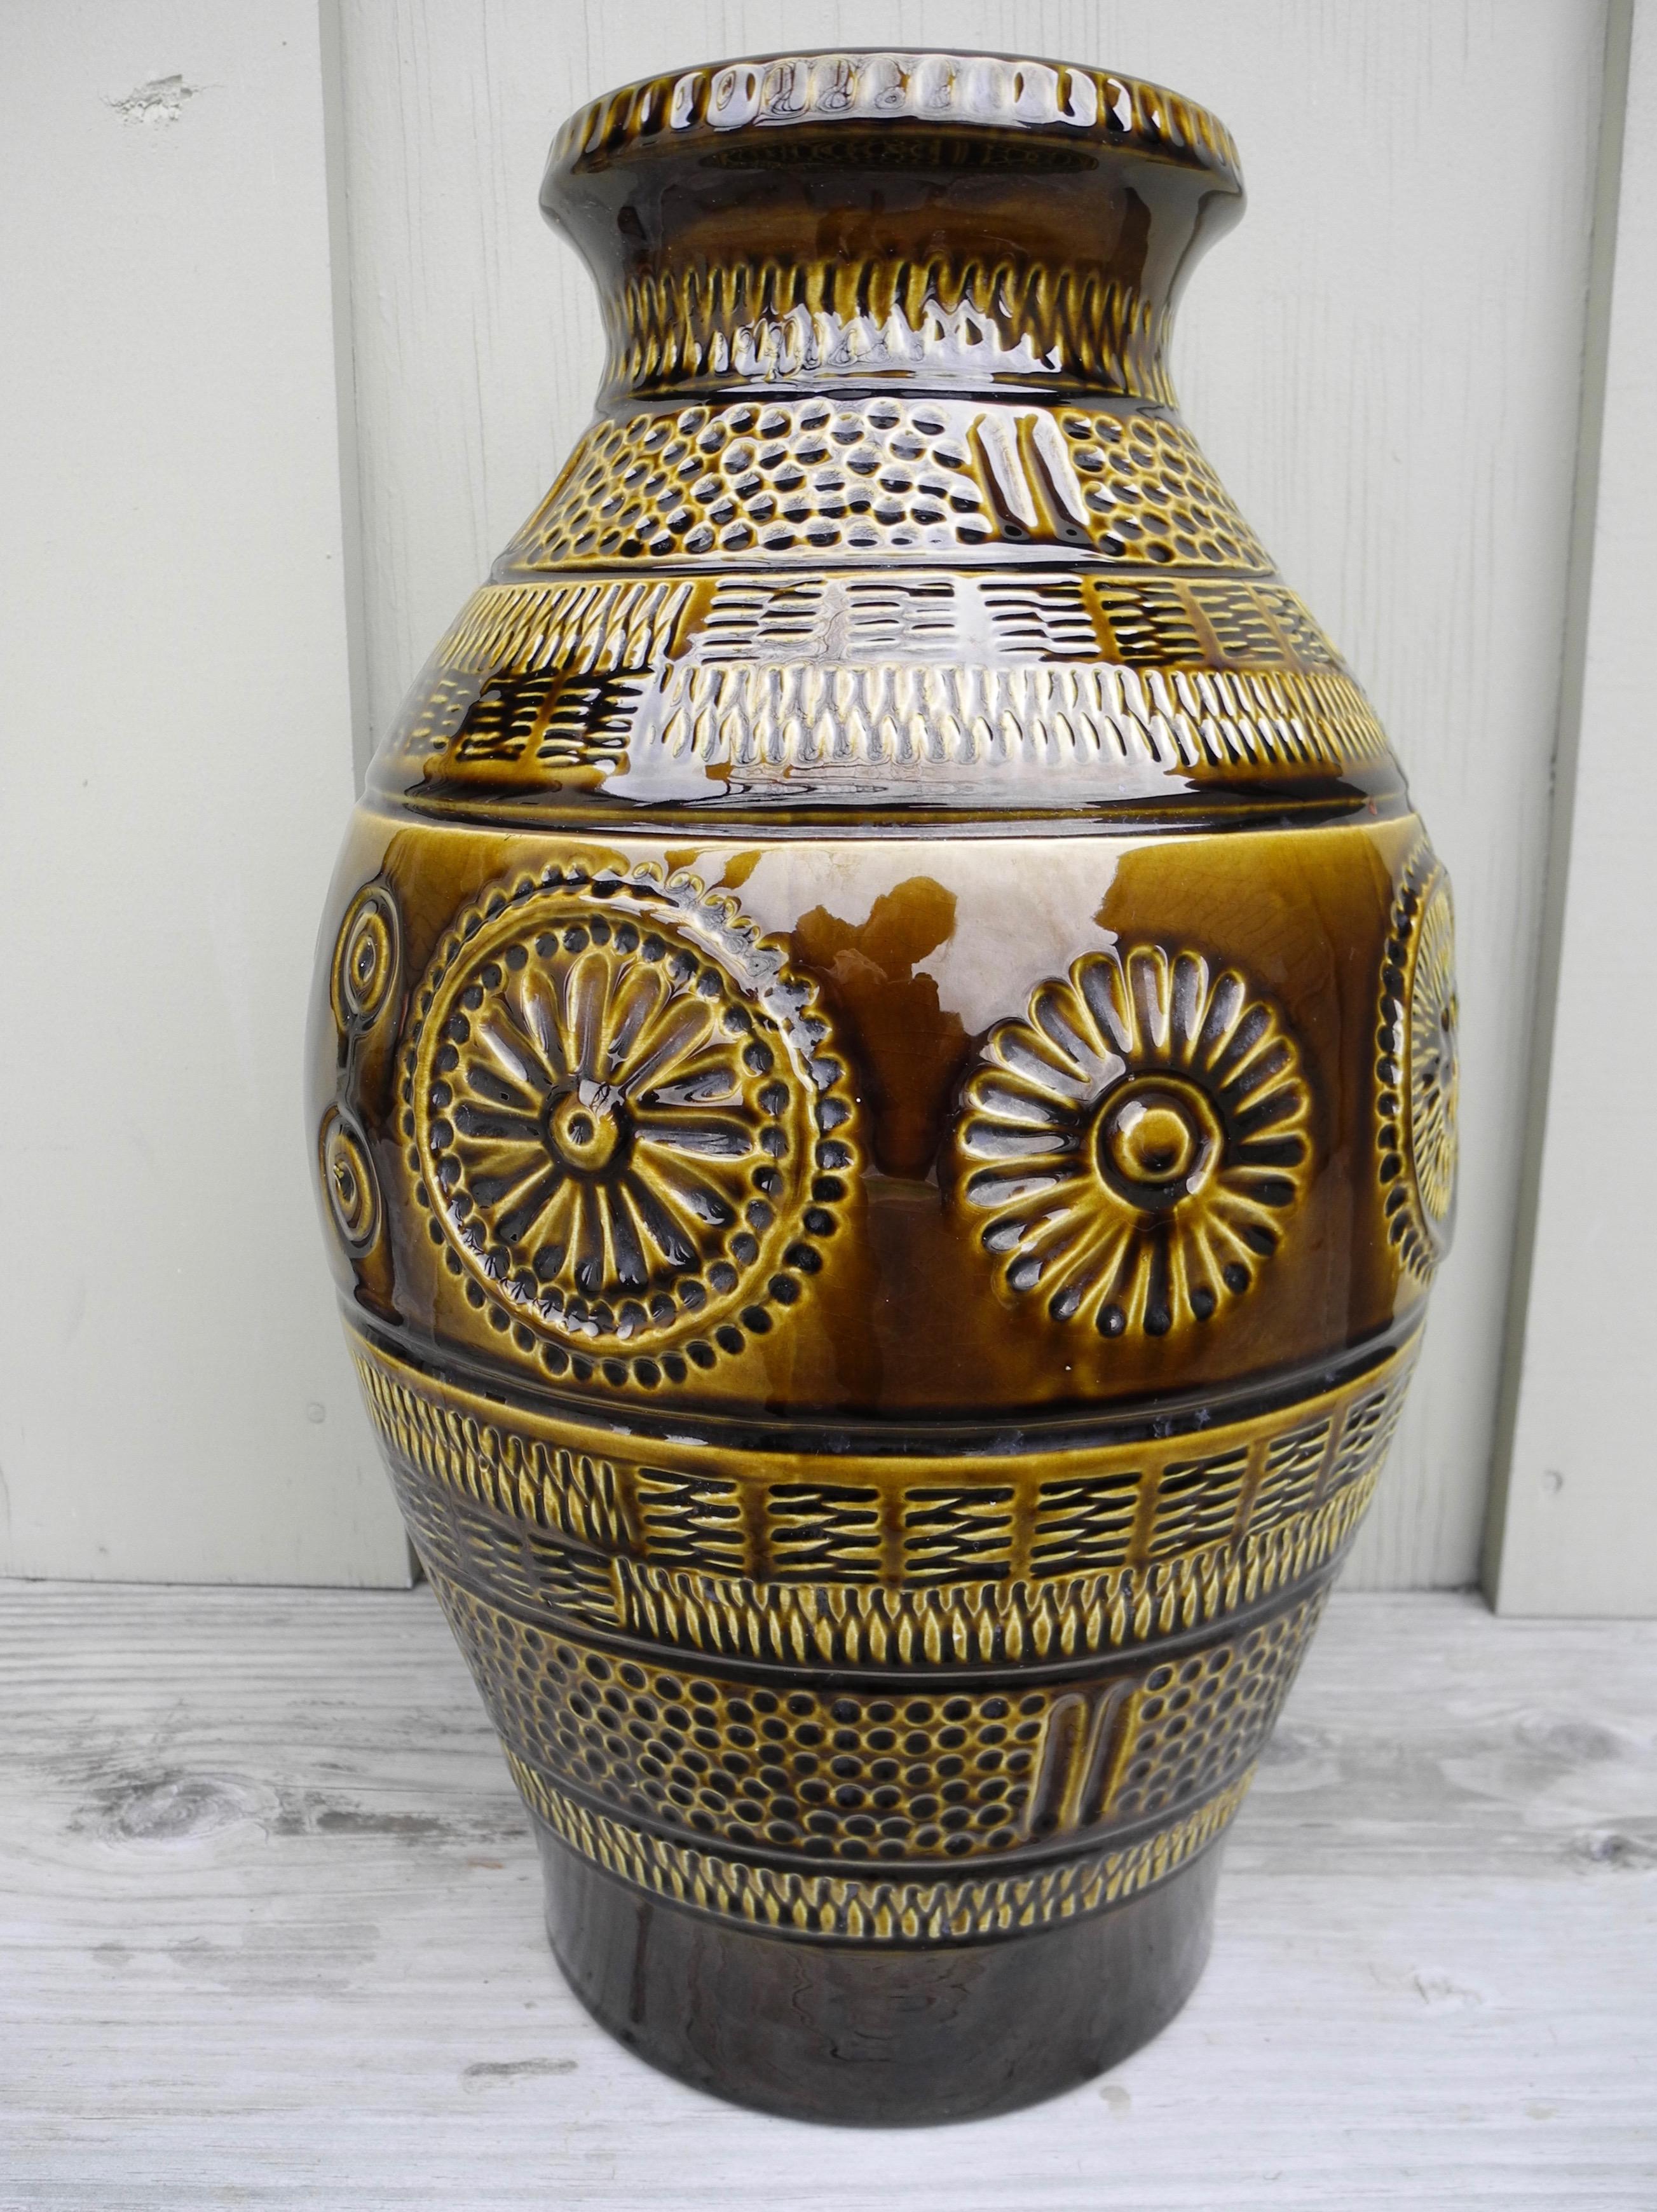 This large former West Germany ceramic vessel jar with flower motif and basket weave is typical of 1960s-1970s design.
An impressive size of 16 inches tall.